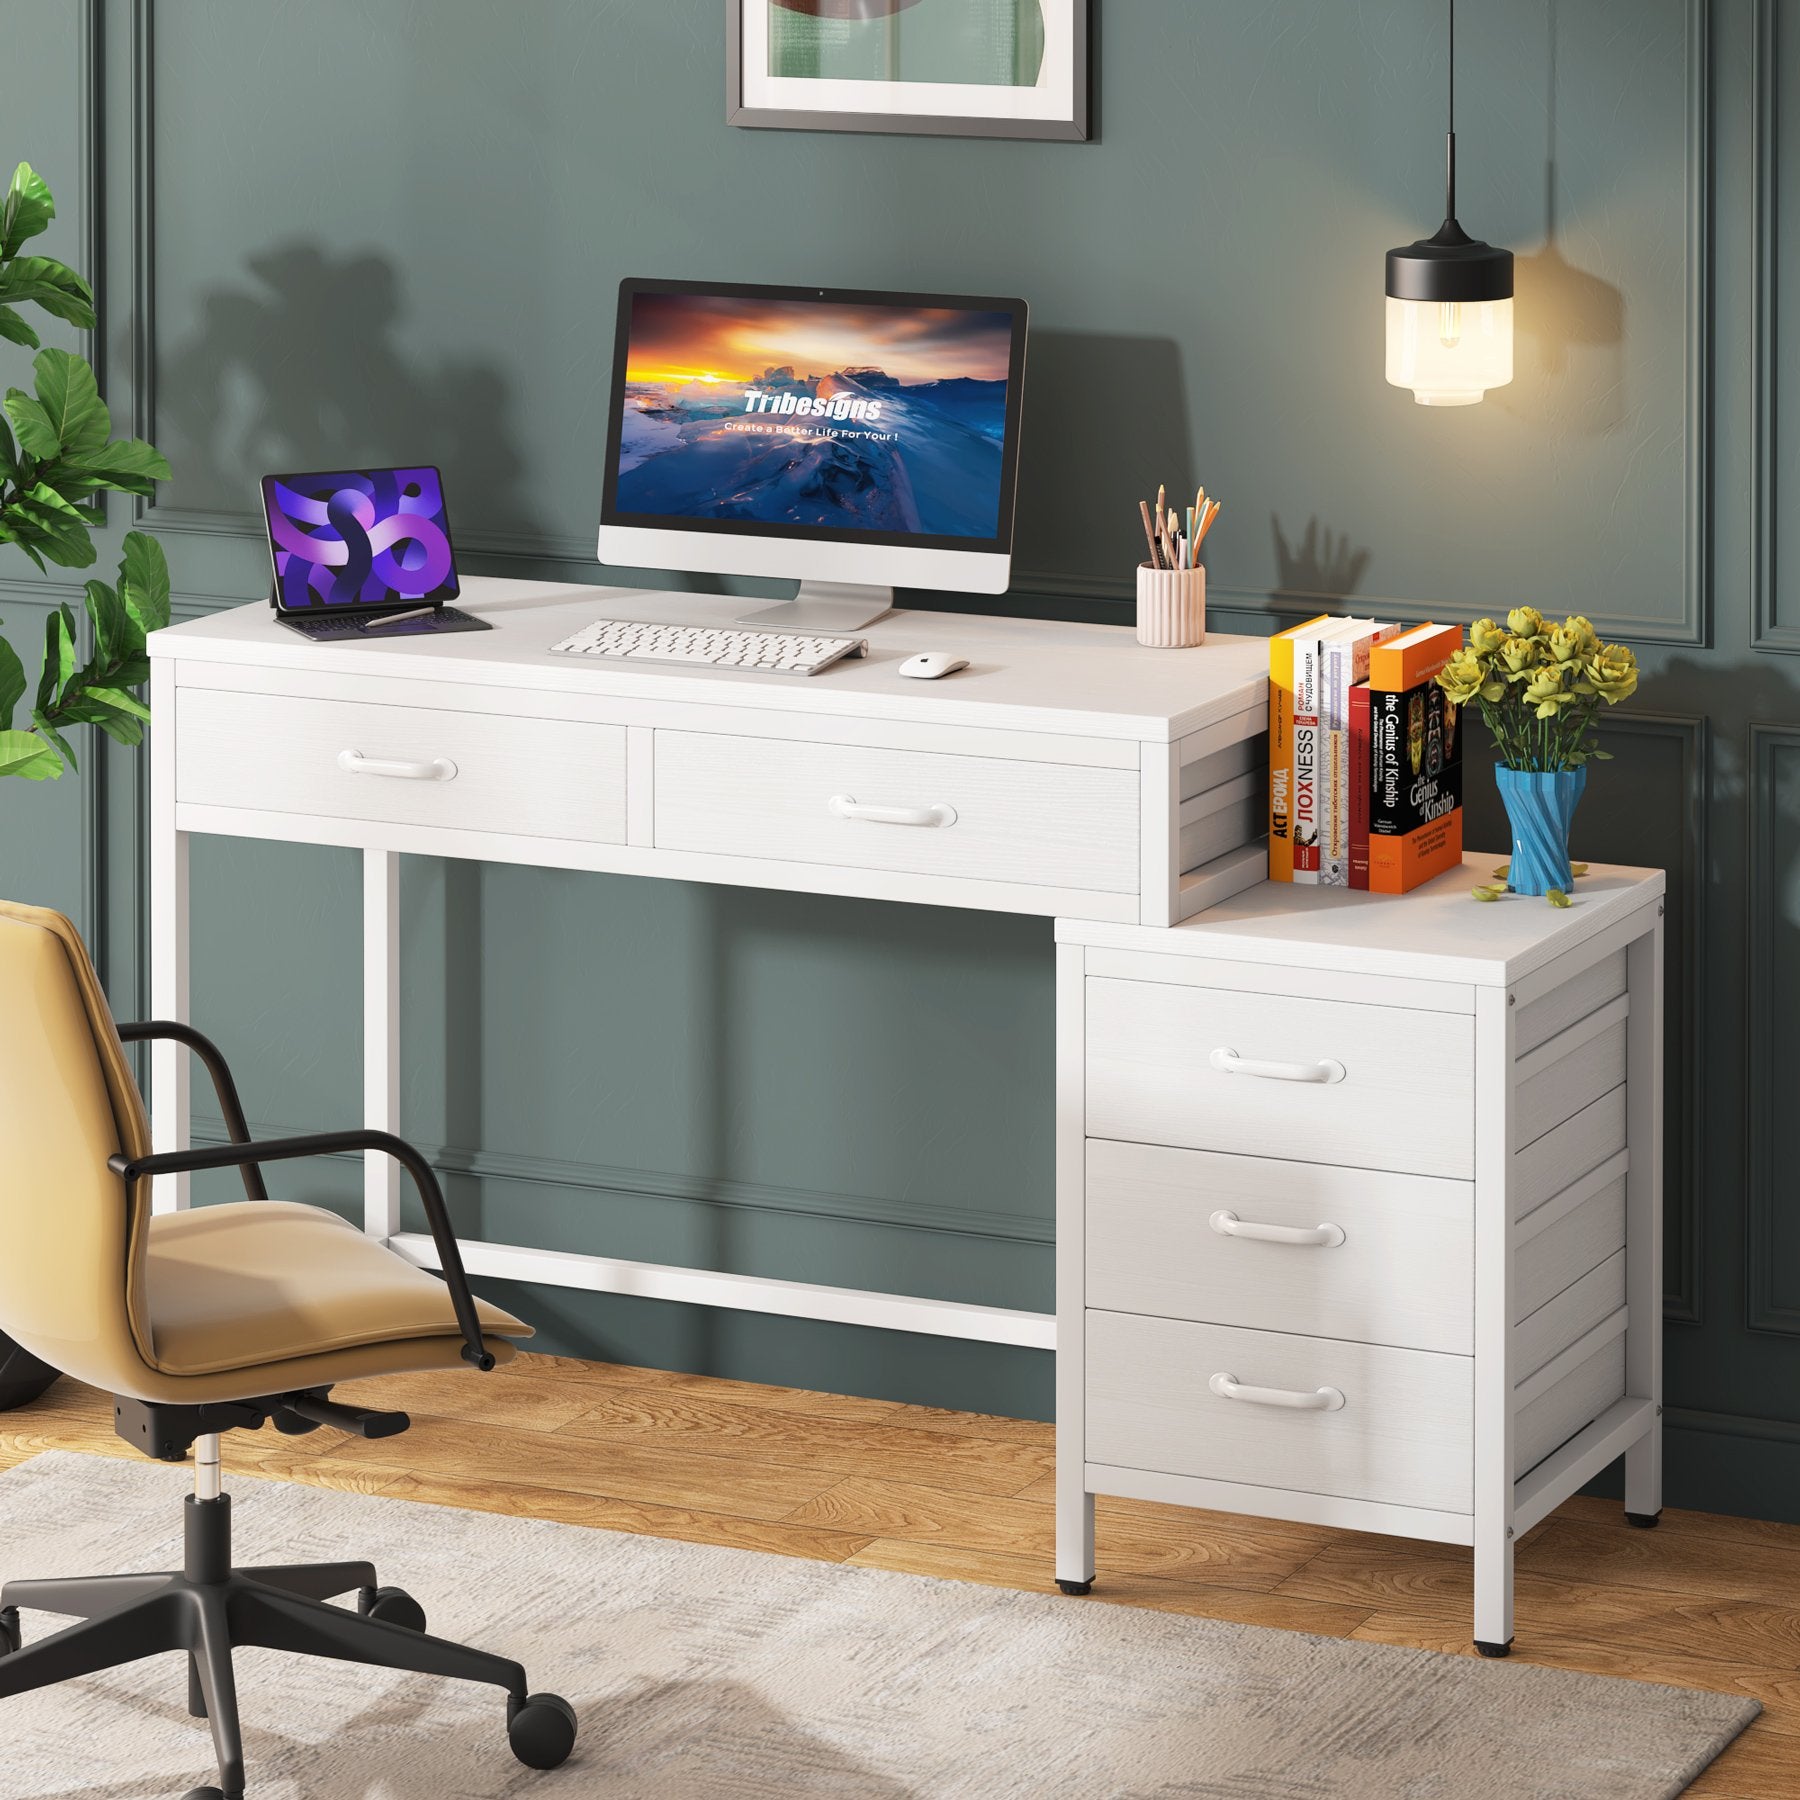 Choosing the Right Desk for Your Home Office